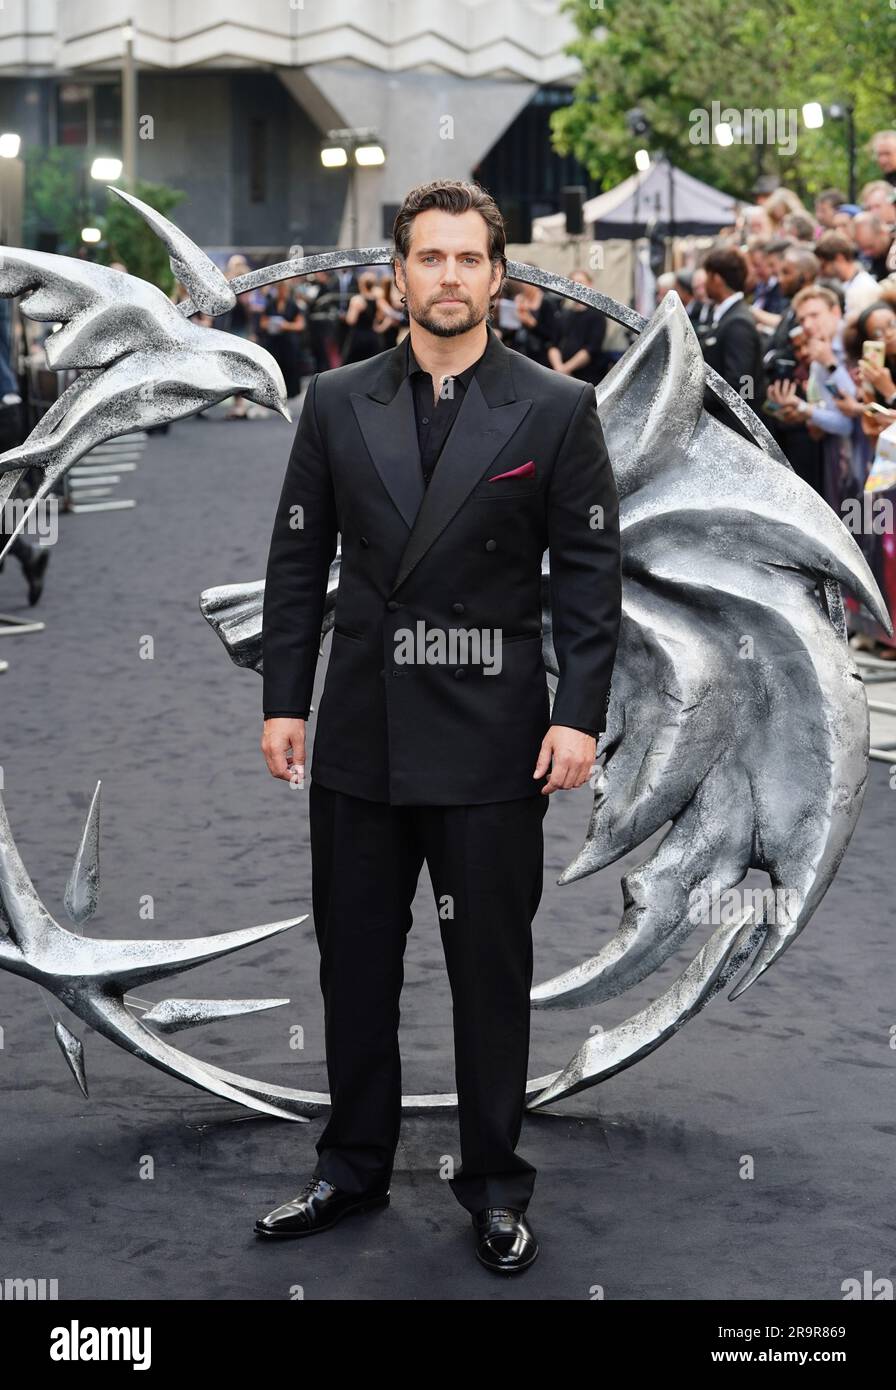 Henry Cavill Attending The Uk Premiere Of The Witcher Season 3 At The Now Building In London